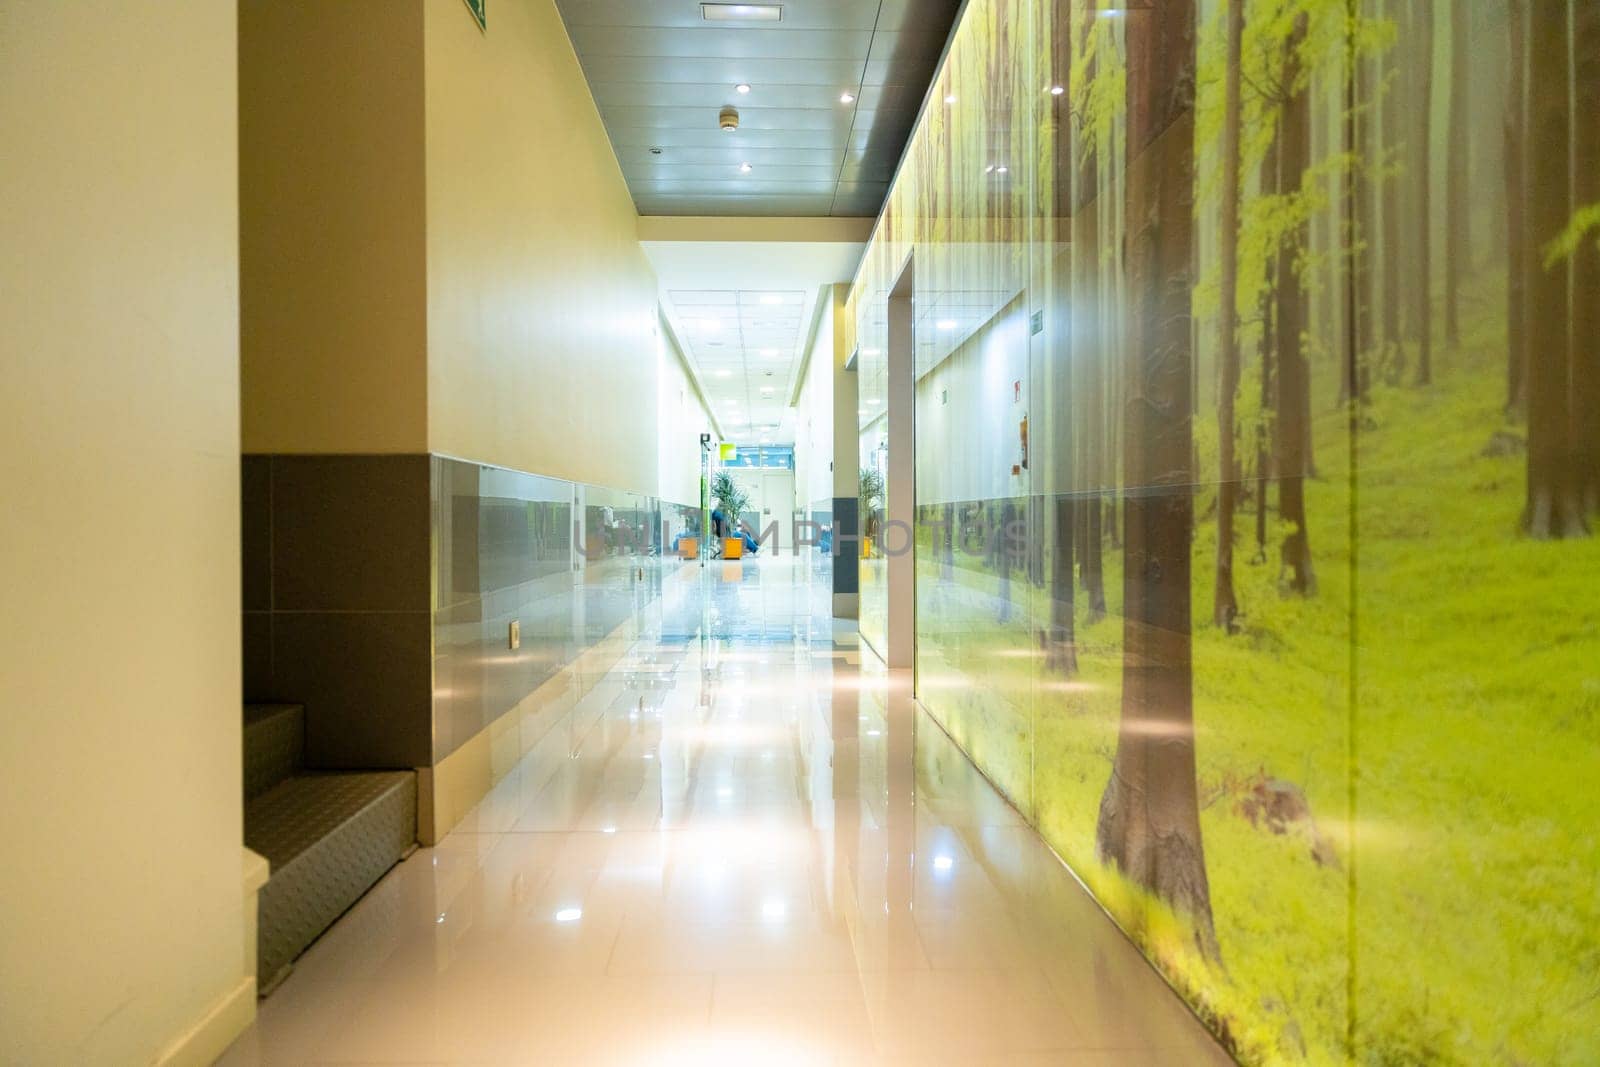 Corridor of a modern ophthalmology clinic with no people around